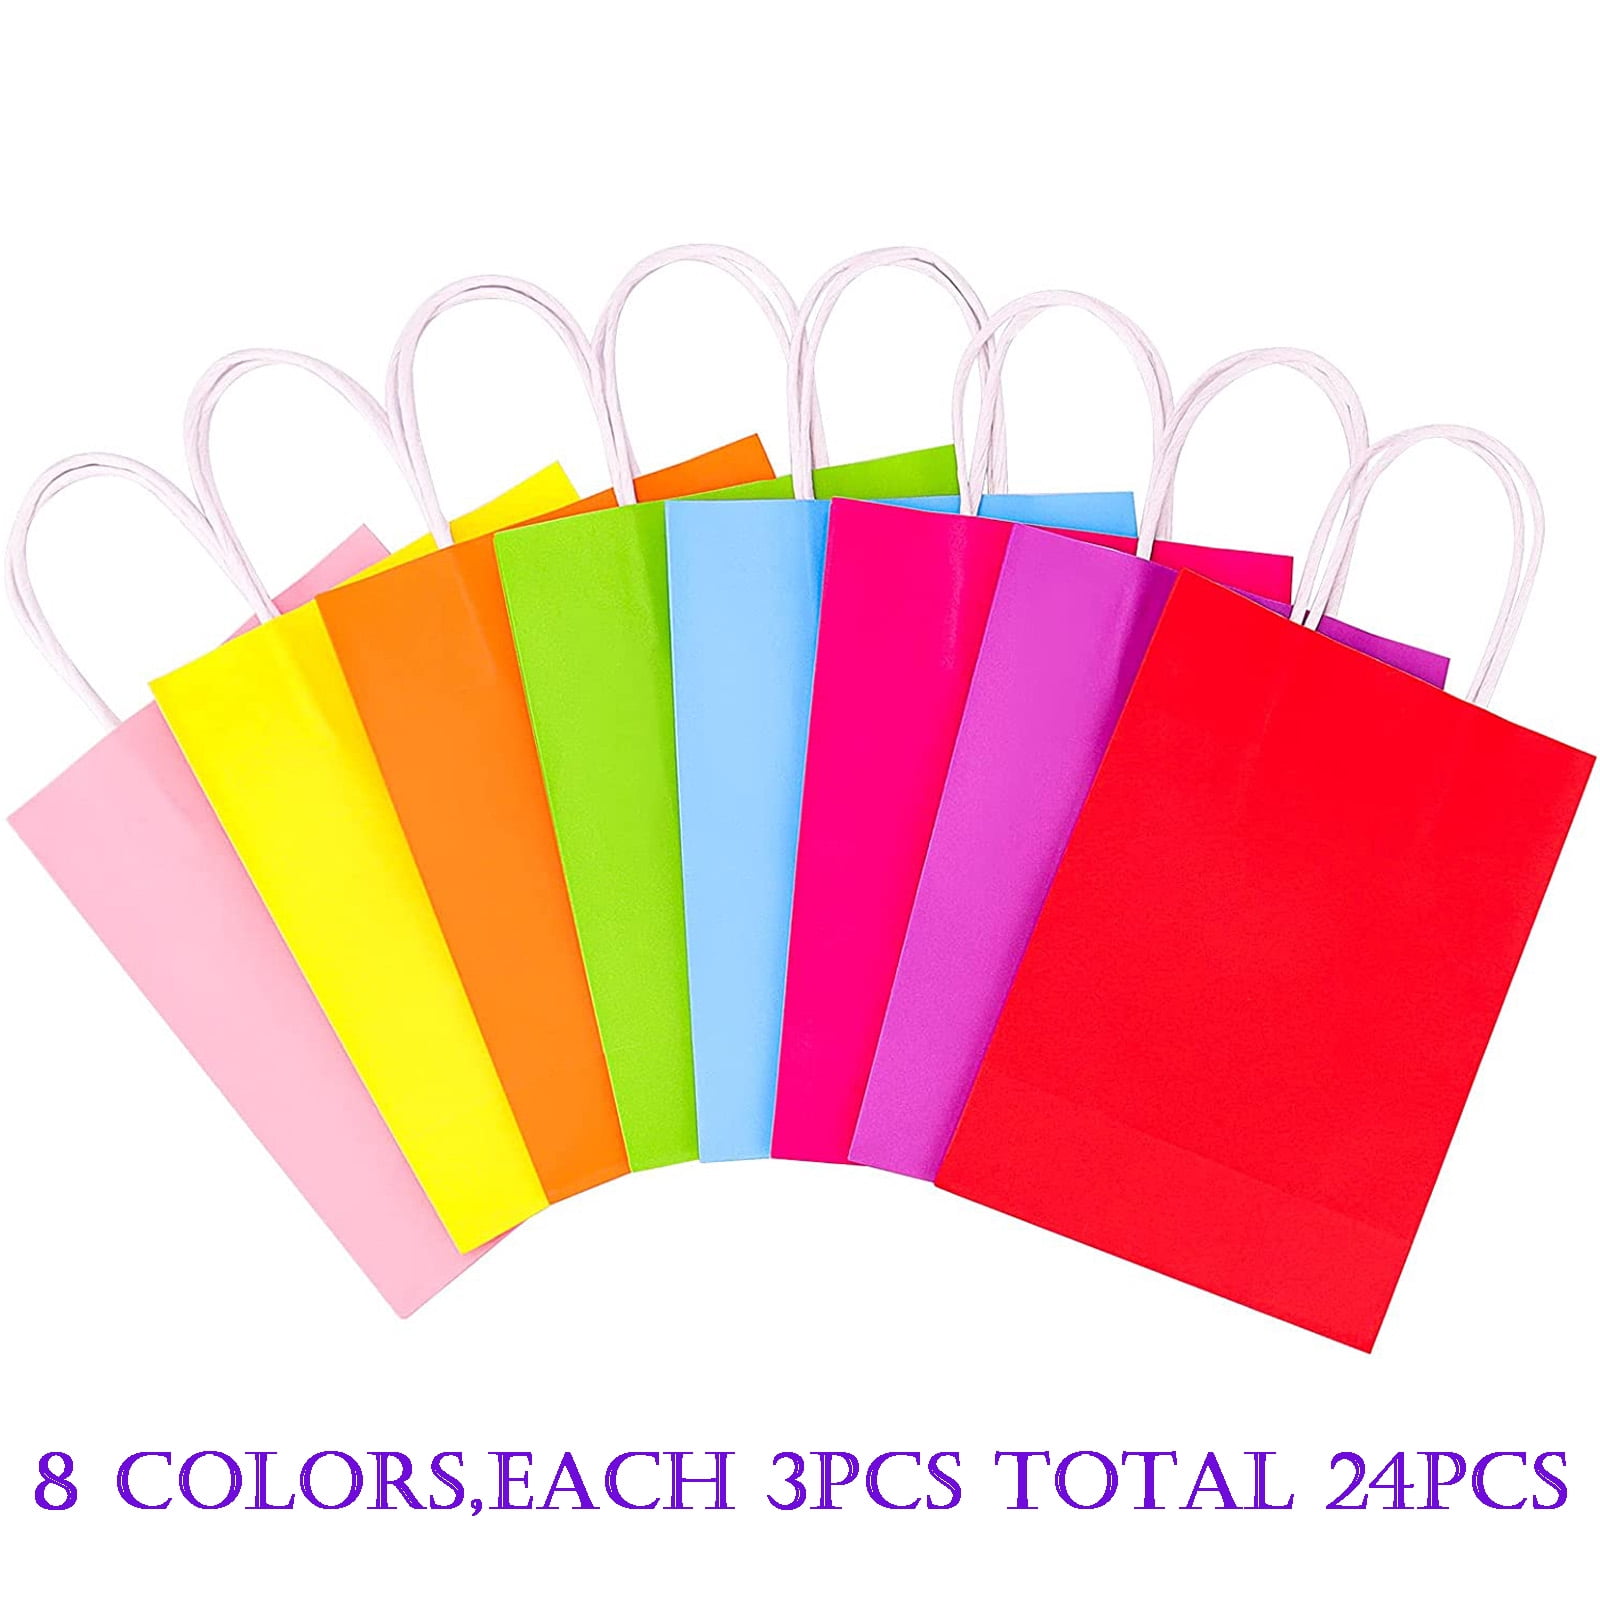 Moretoes 56pcs Party Paper Bags, 8 Colors Rainbow Party Favor Bags, Colored Kraft Goodie Bags with Handle for Birthday, Gift, Wedding and Celebrations